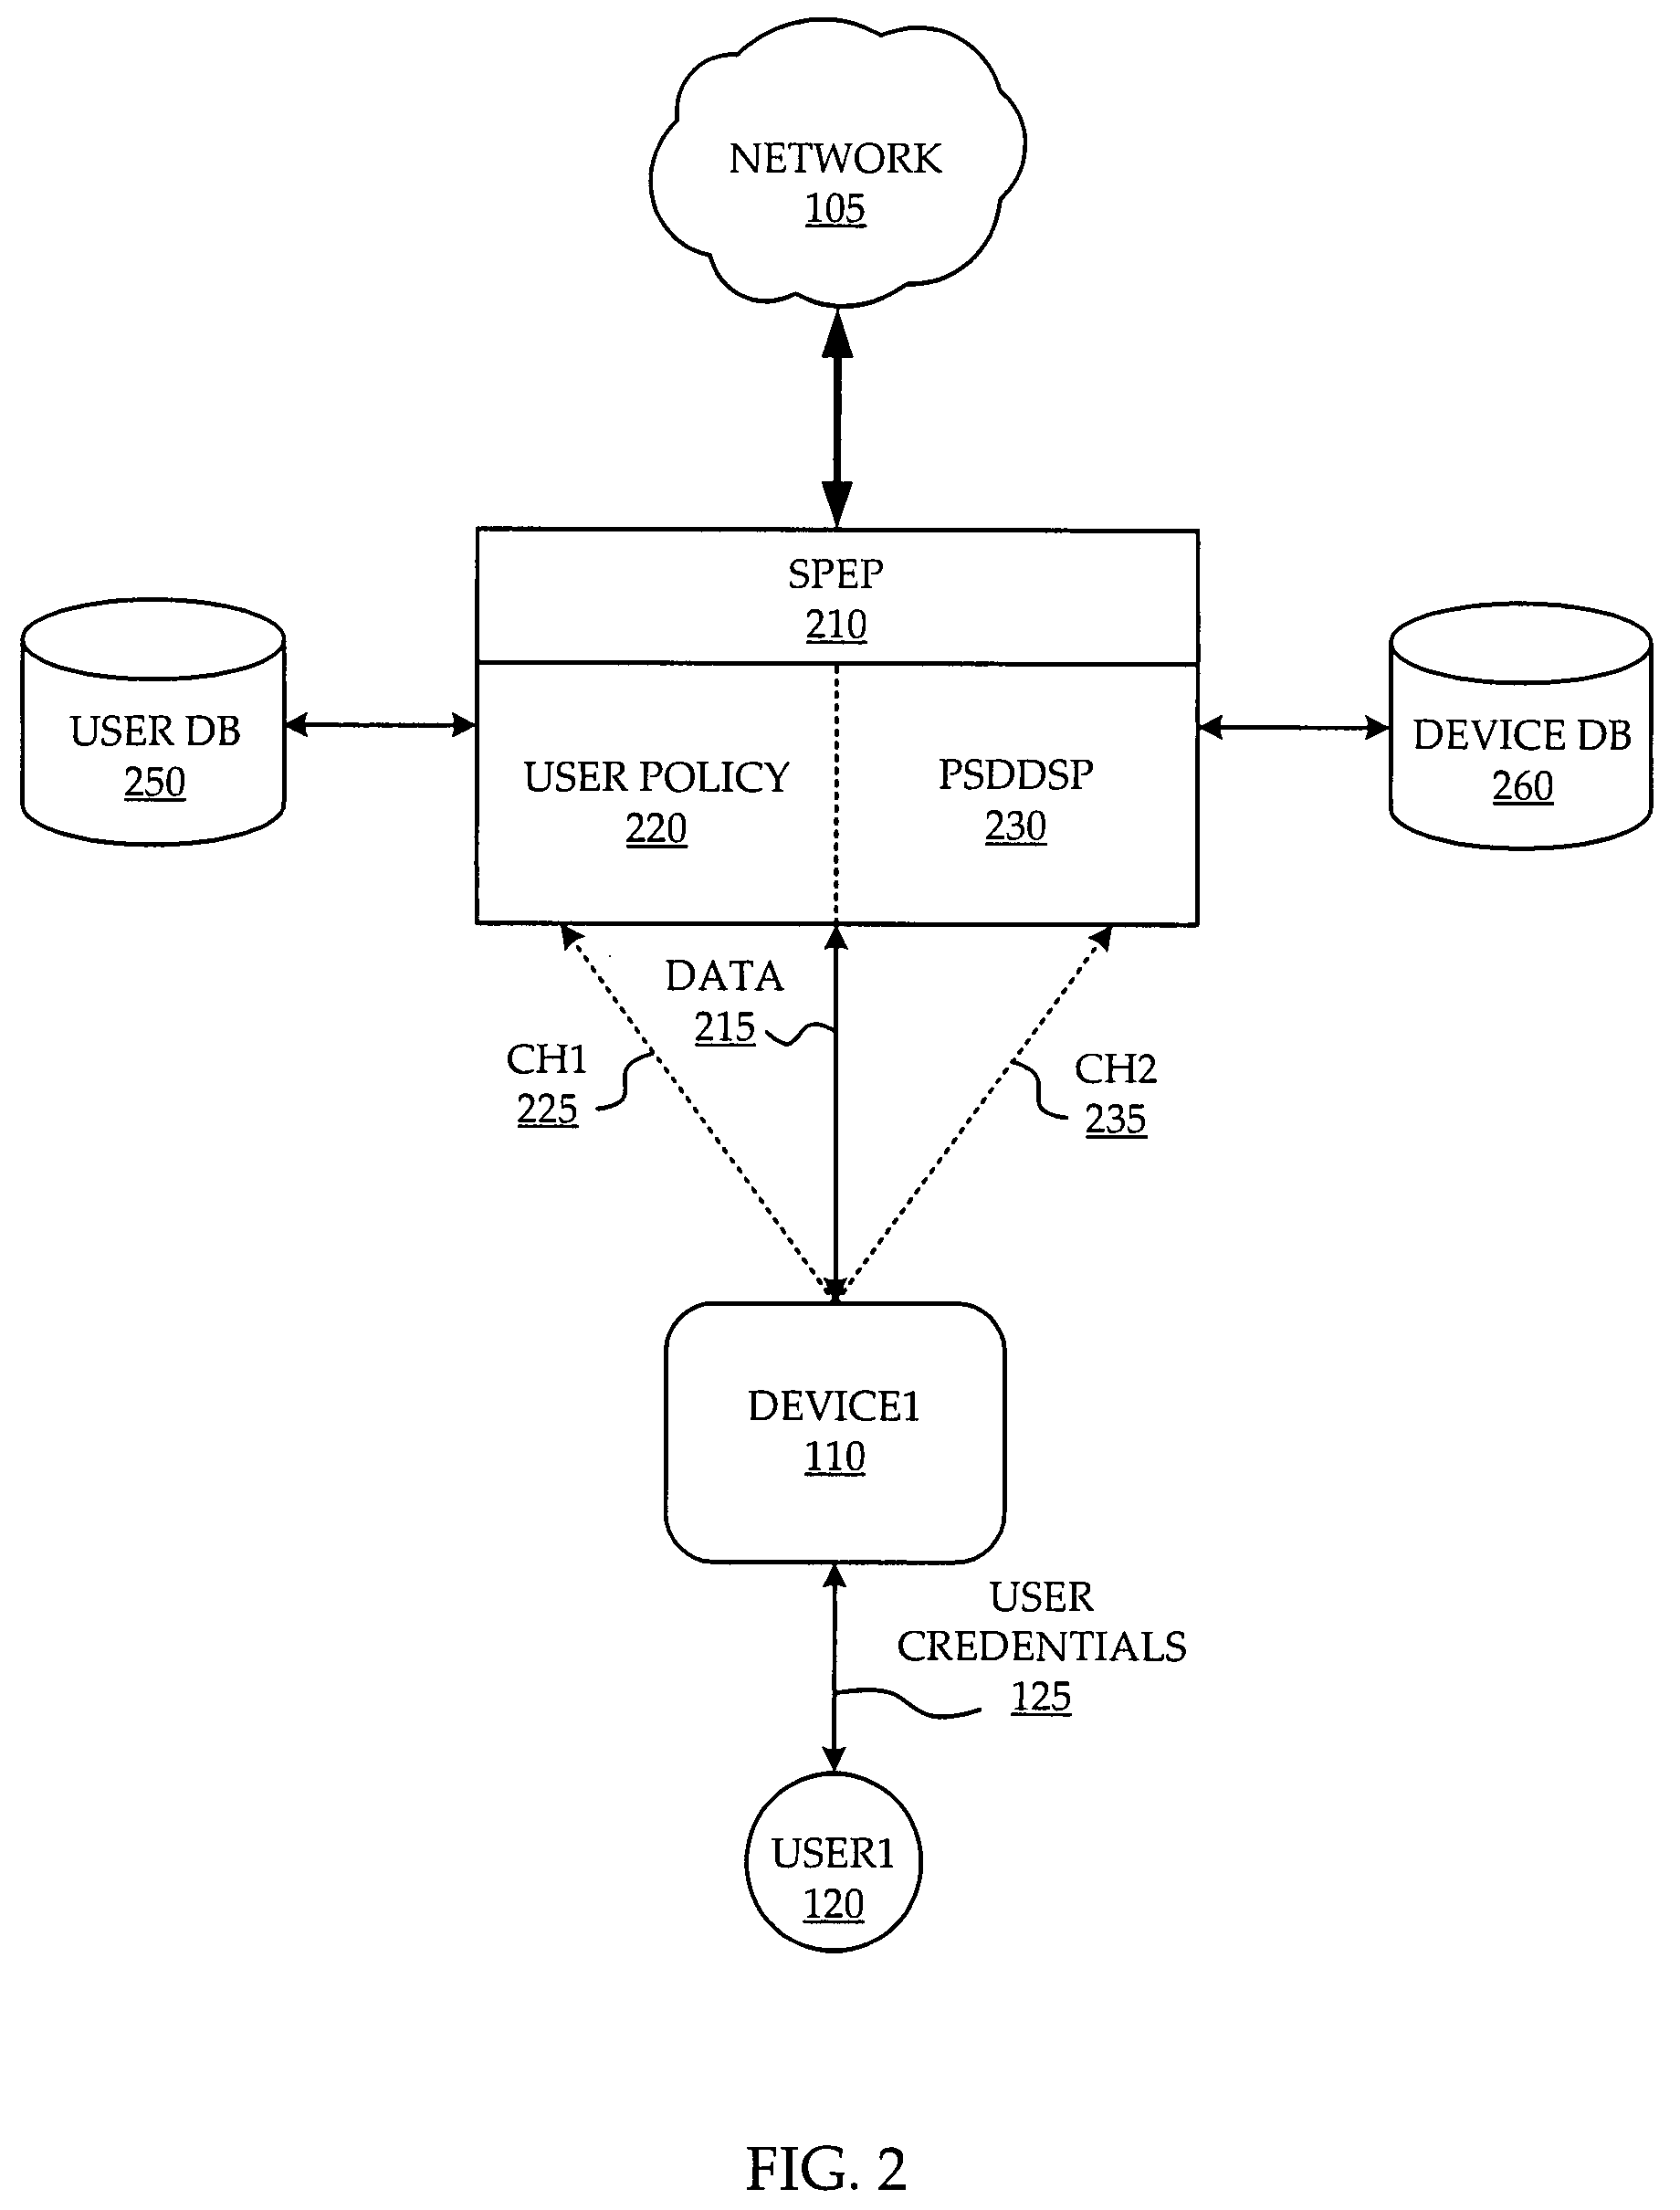 System and method of network access security policy management by user and device